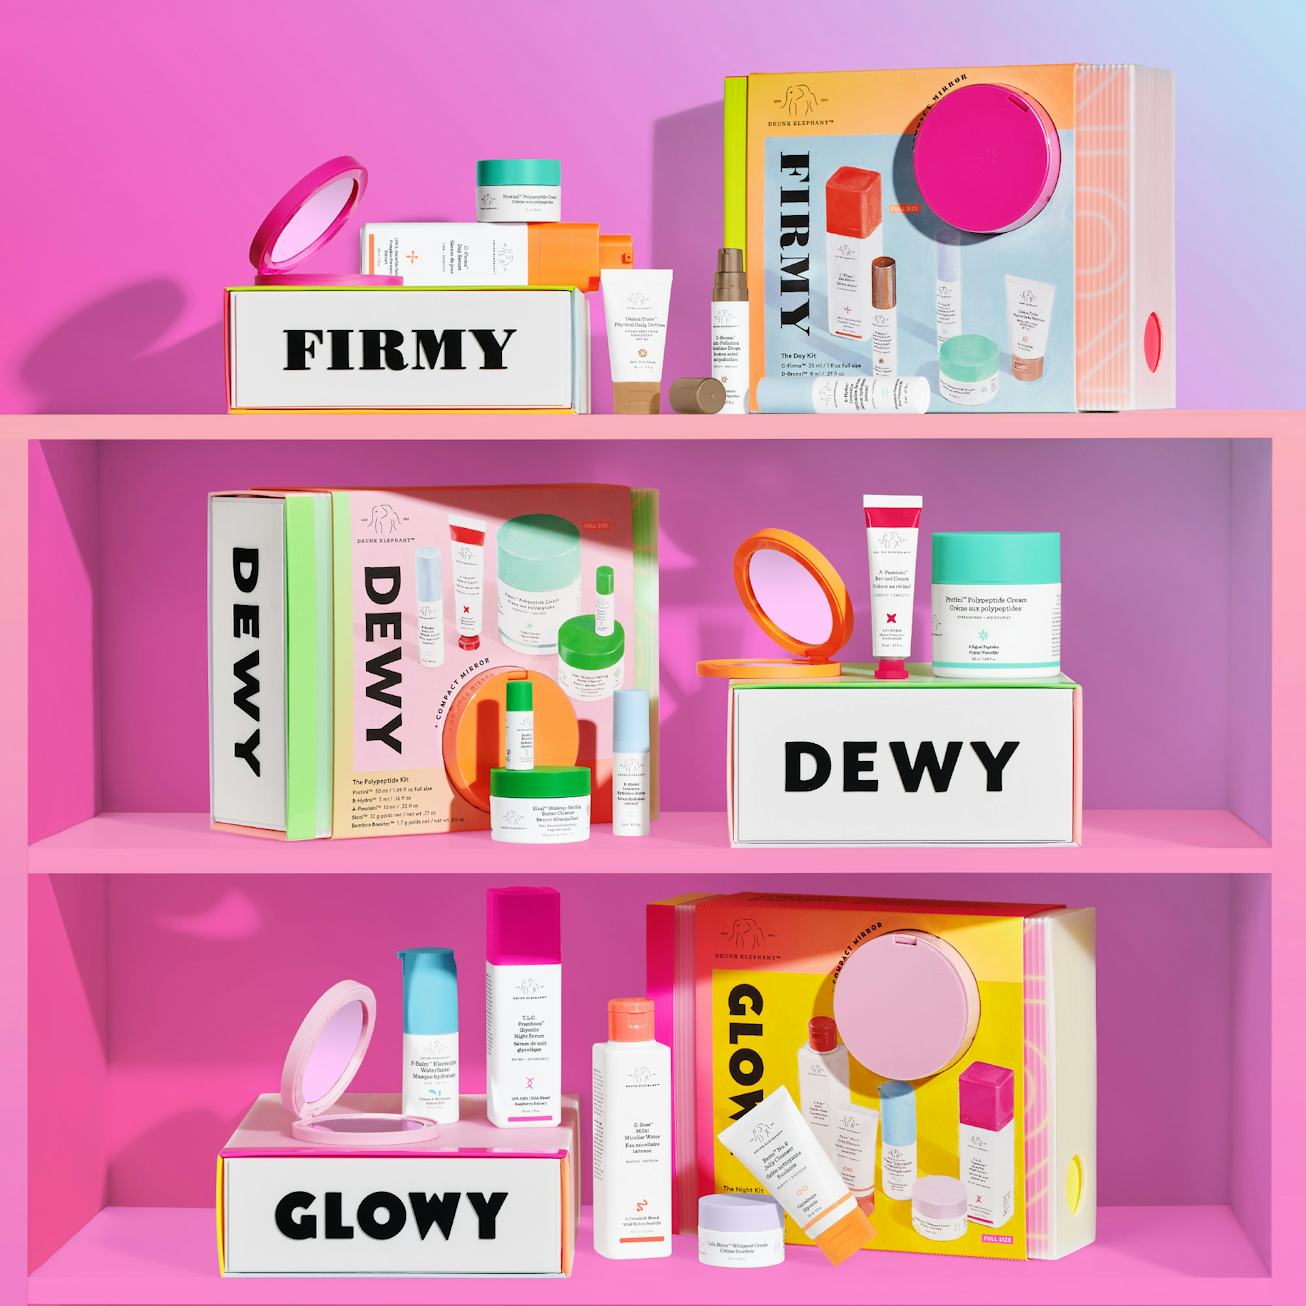 Dewy, Firmy, and Glowy beauty product collection on pink shelves